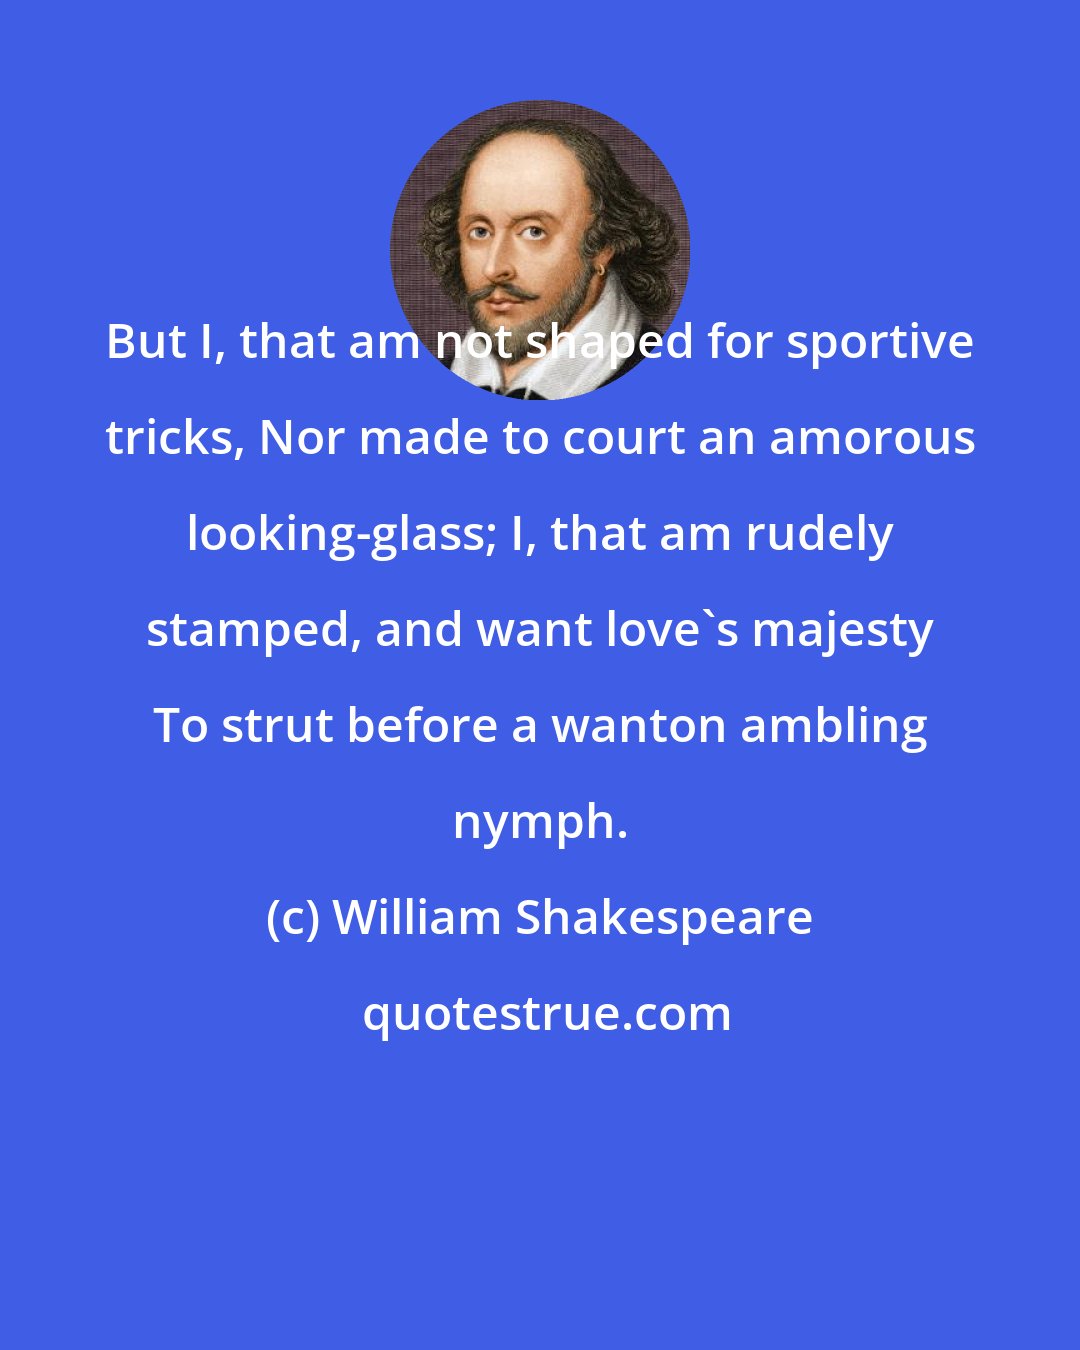 William Shakespeare: But I, that am not shaped for sportive tricks, Nor made to court an amorous looking-glass; I, that am rudely stamped, and want love's majesty To strut before a wanton ambling nymph.